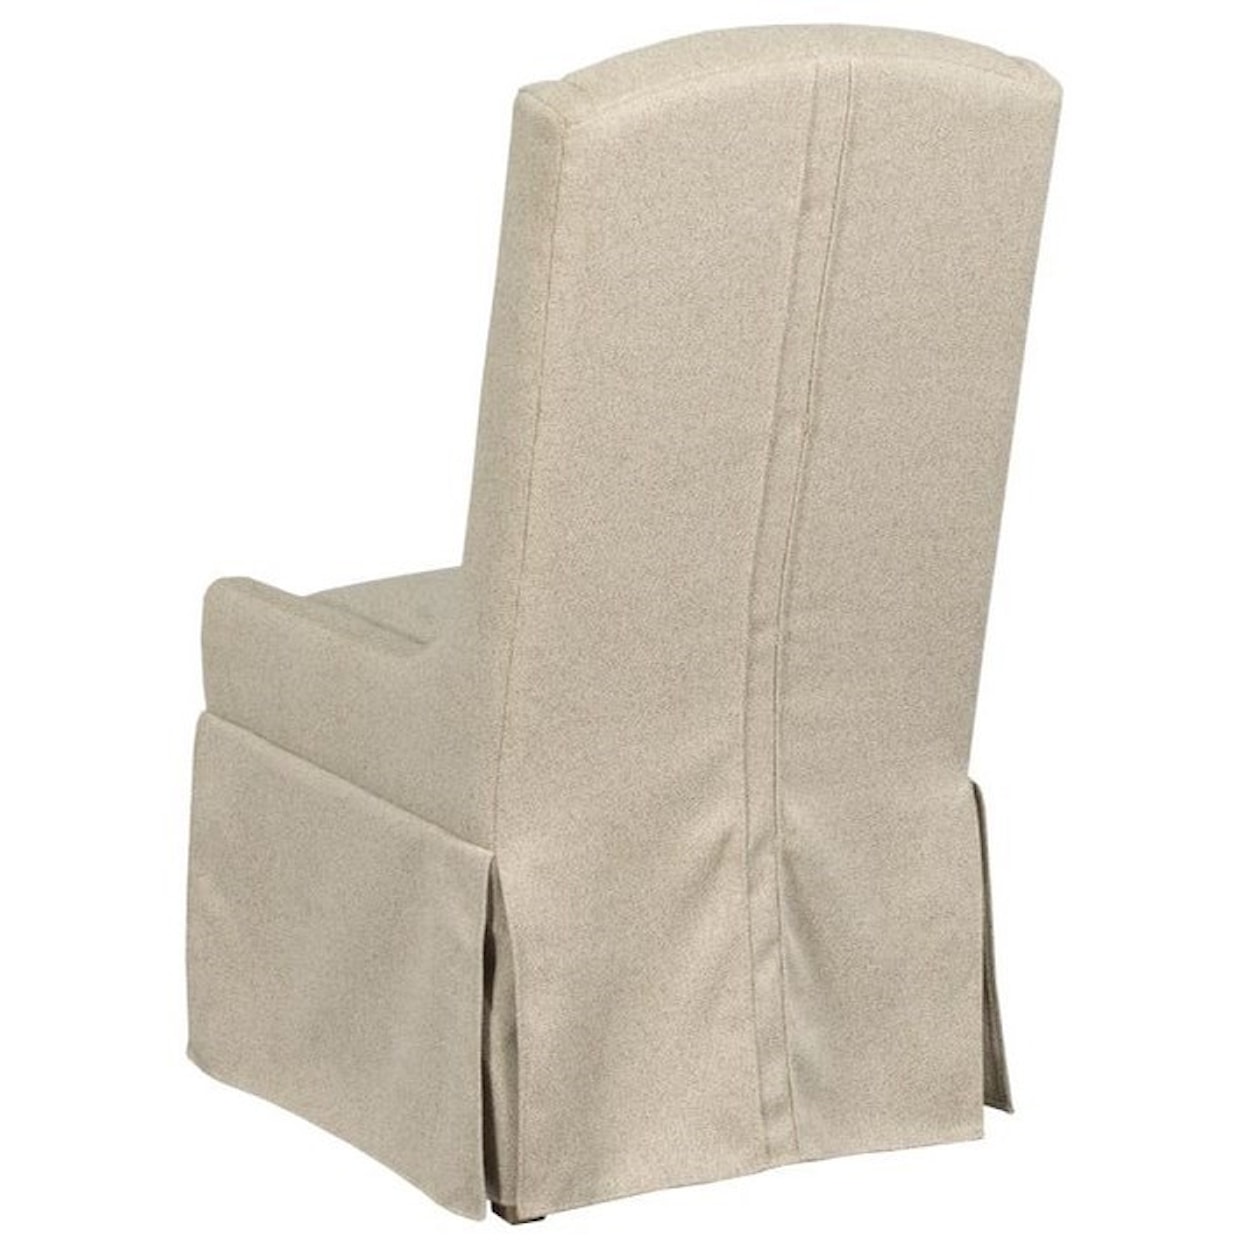 Kincaid Furniture Mill House Barrier Slip Covered Dining Chair